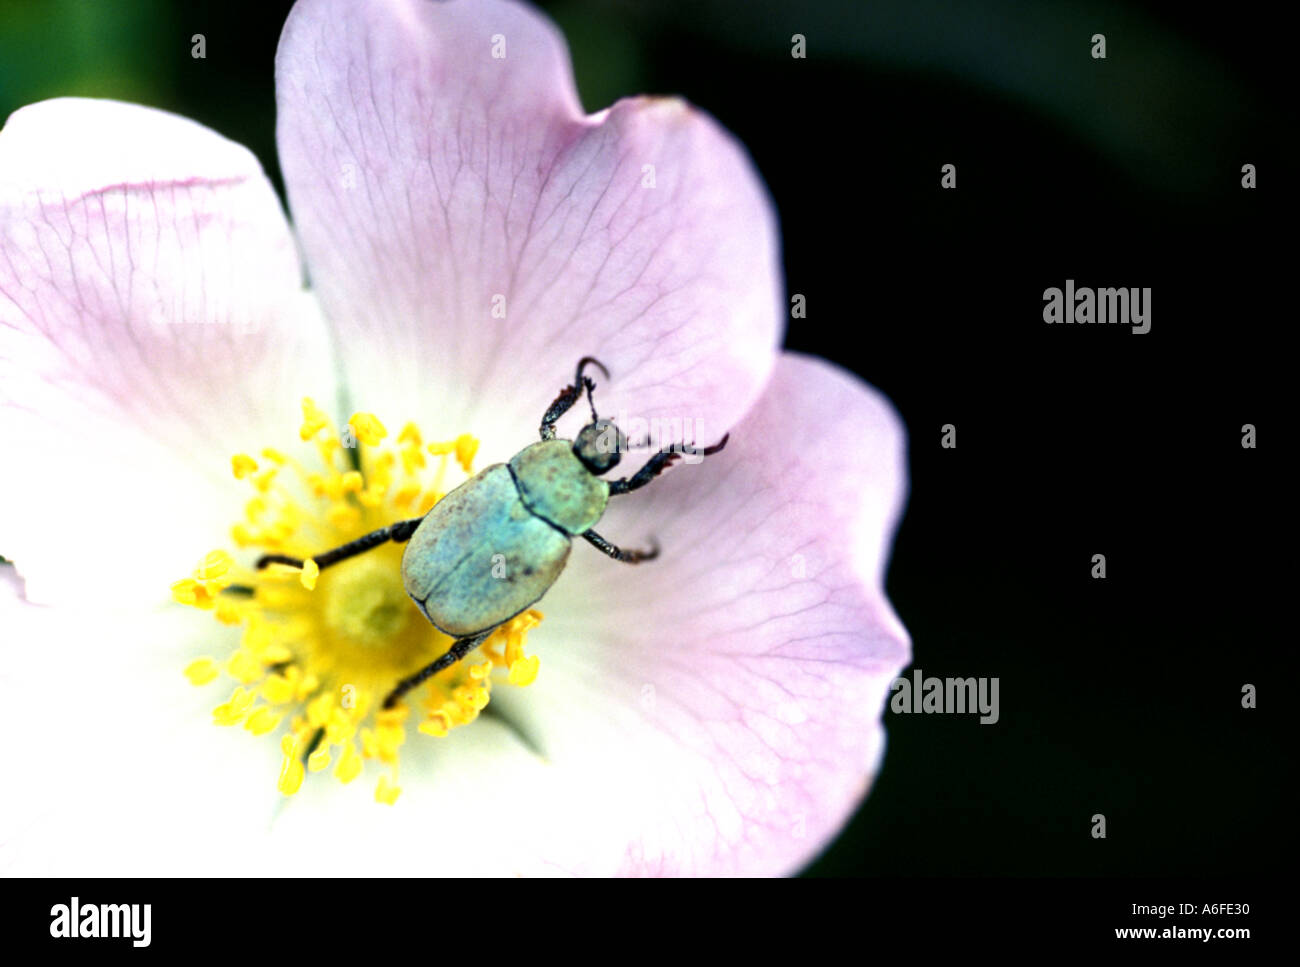 Green coloured scarab beetle feeding off pollen on a wild rose flower Stock Photo